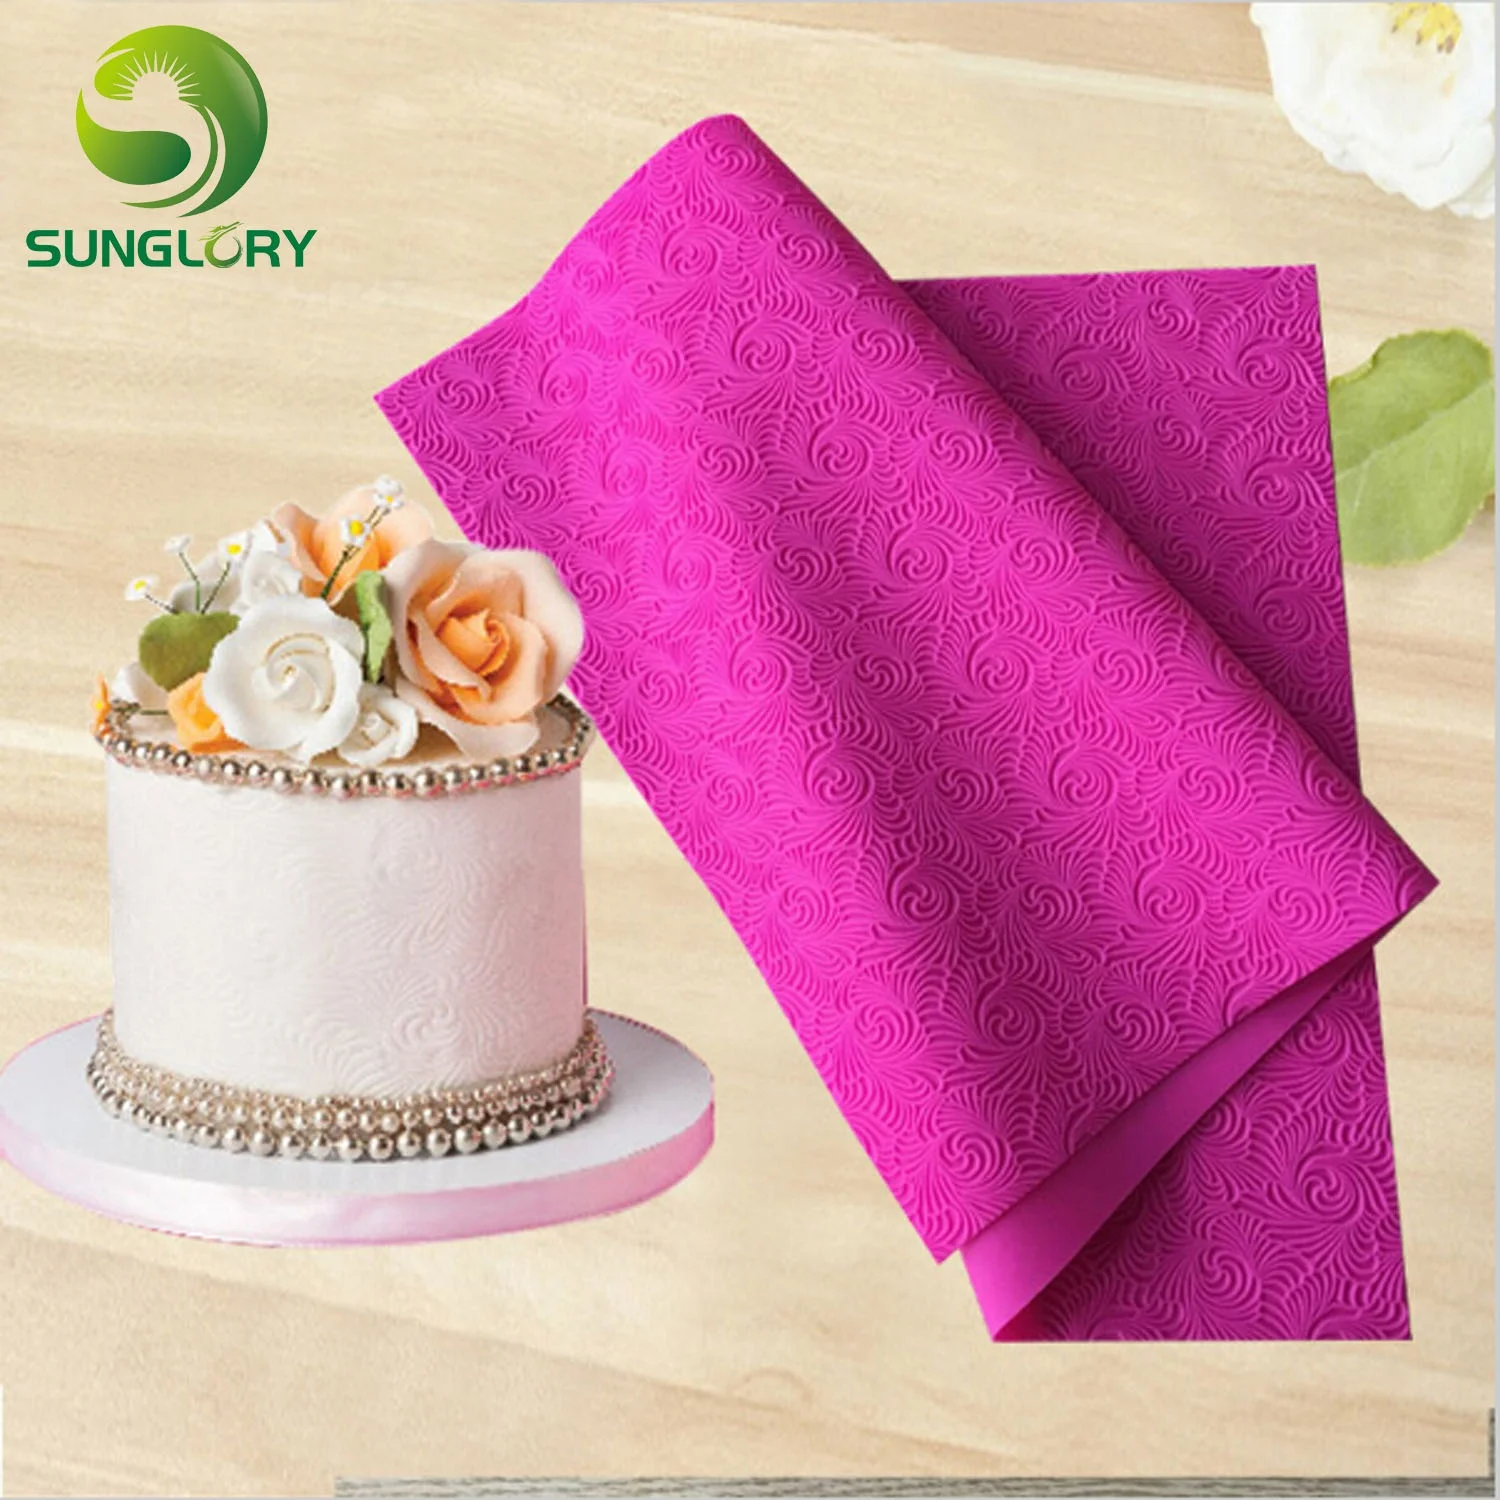 

Wedding Impression Spiricle Silicone Lace Mat Border Baking Fondant 3D Mold To Decorate Cakes Lace Mold Cake Decorating Tools